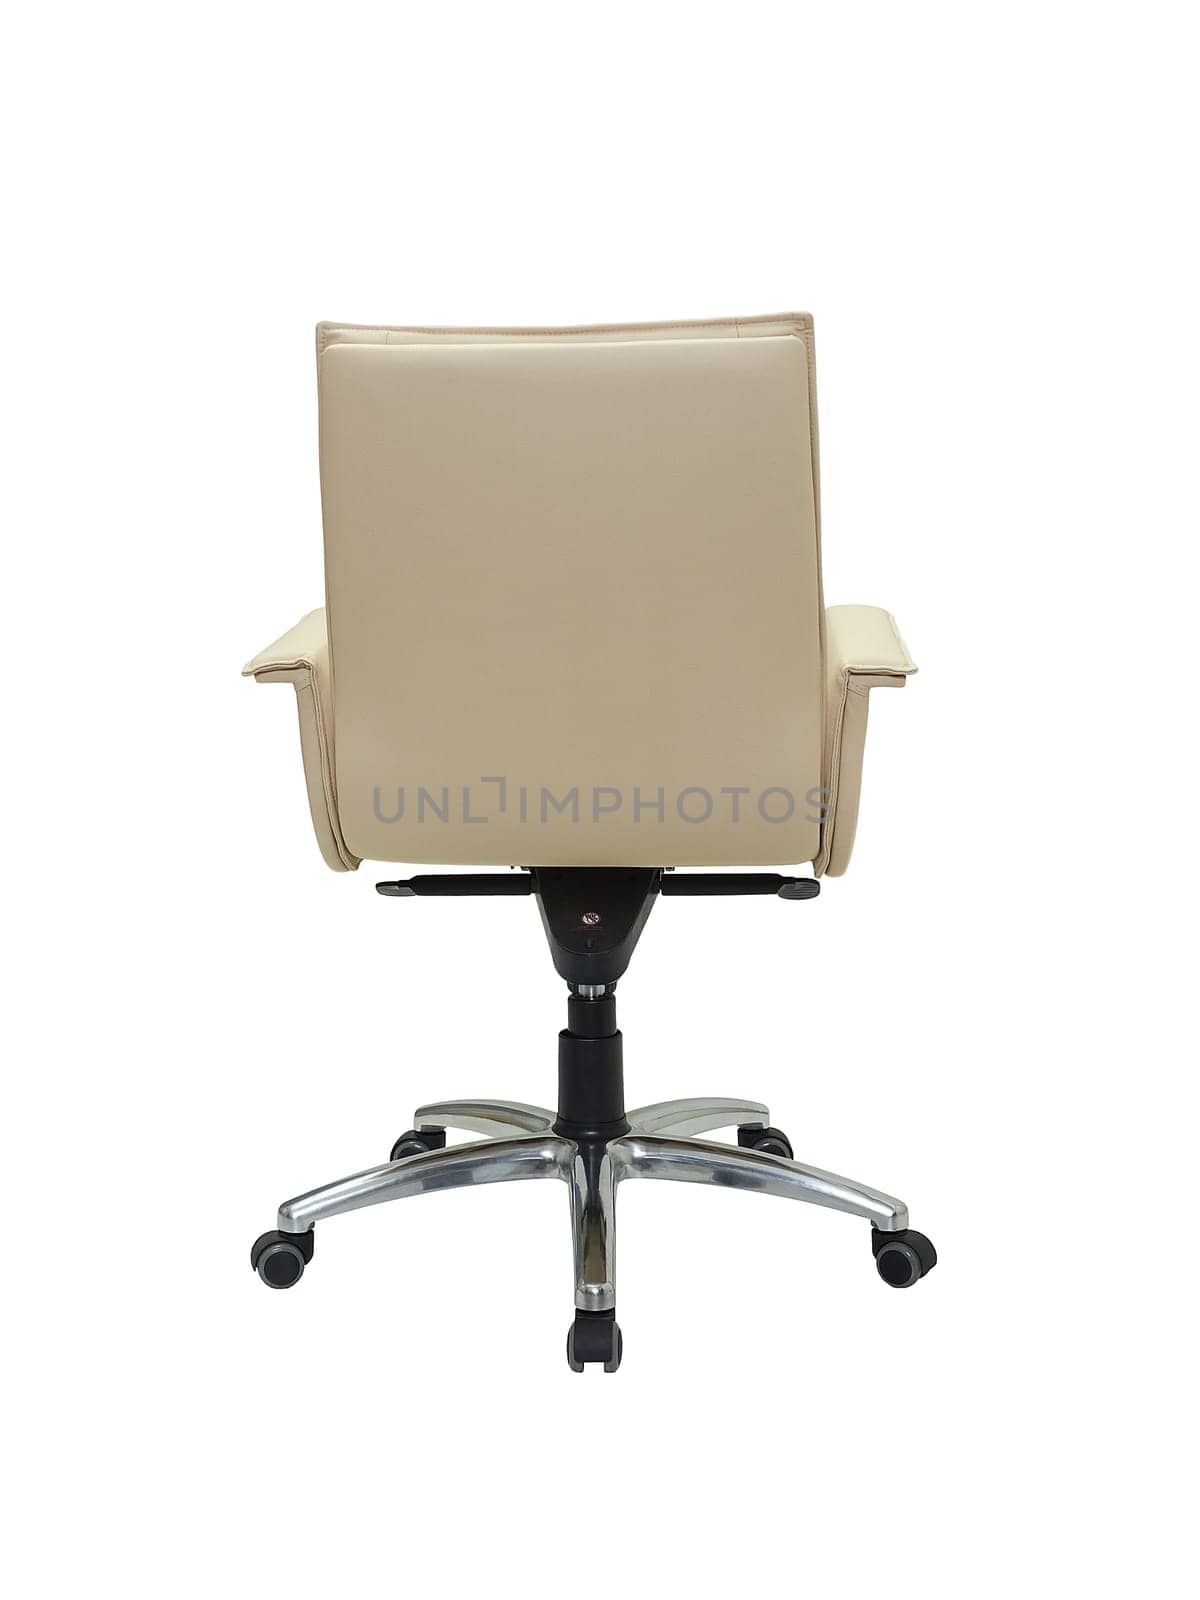 beige office armchair on wheels isolated on white background, back view. furniture in minimal style